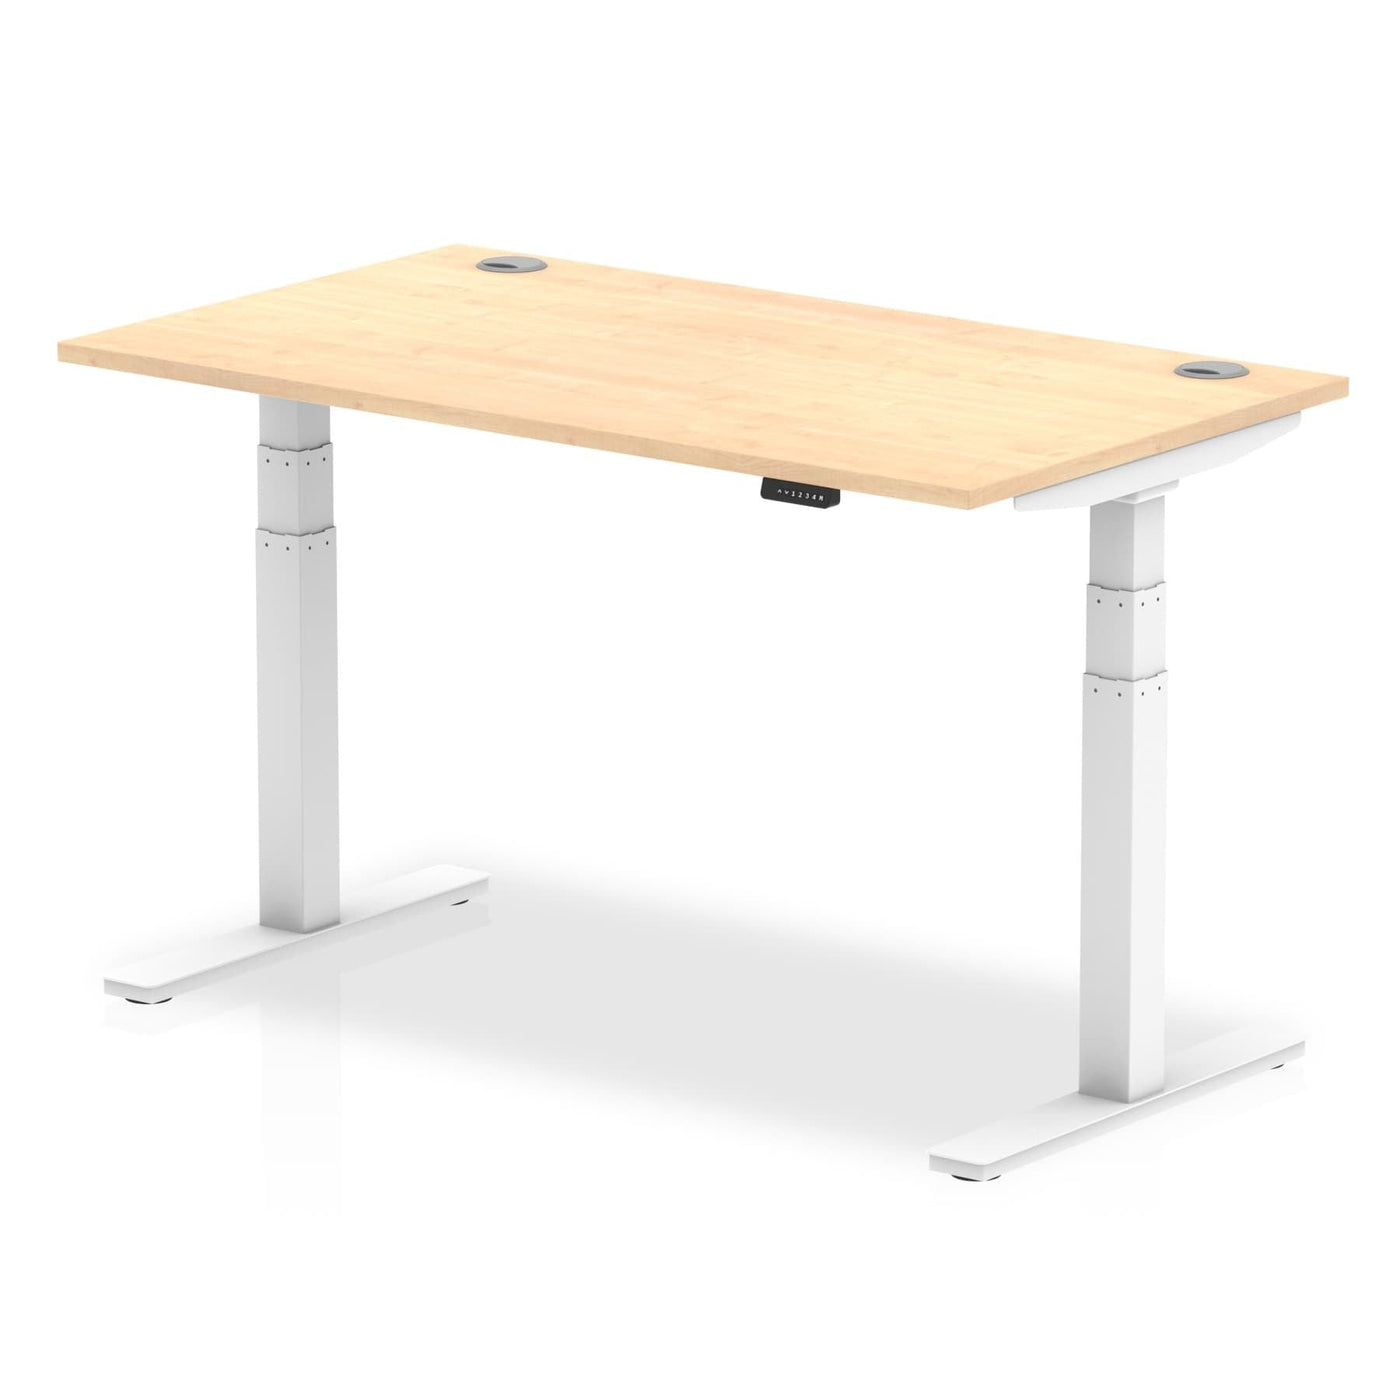 Air Height Adjustable Desk with Cable Ports | Home Office Furniture | Homework Desk | Work From Home Desk 